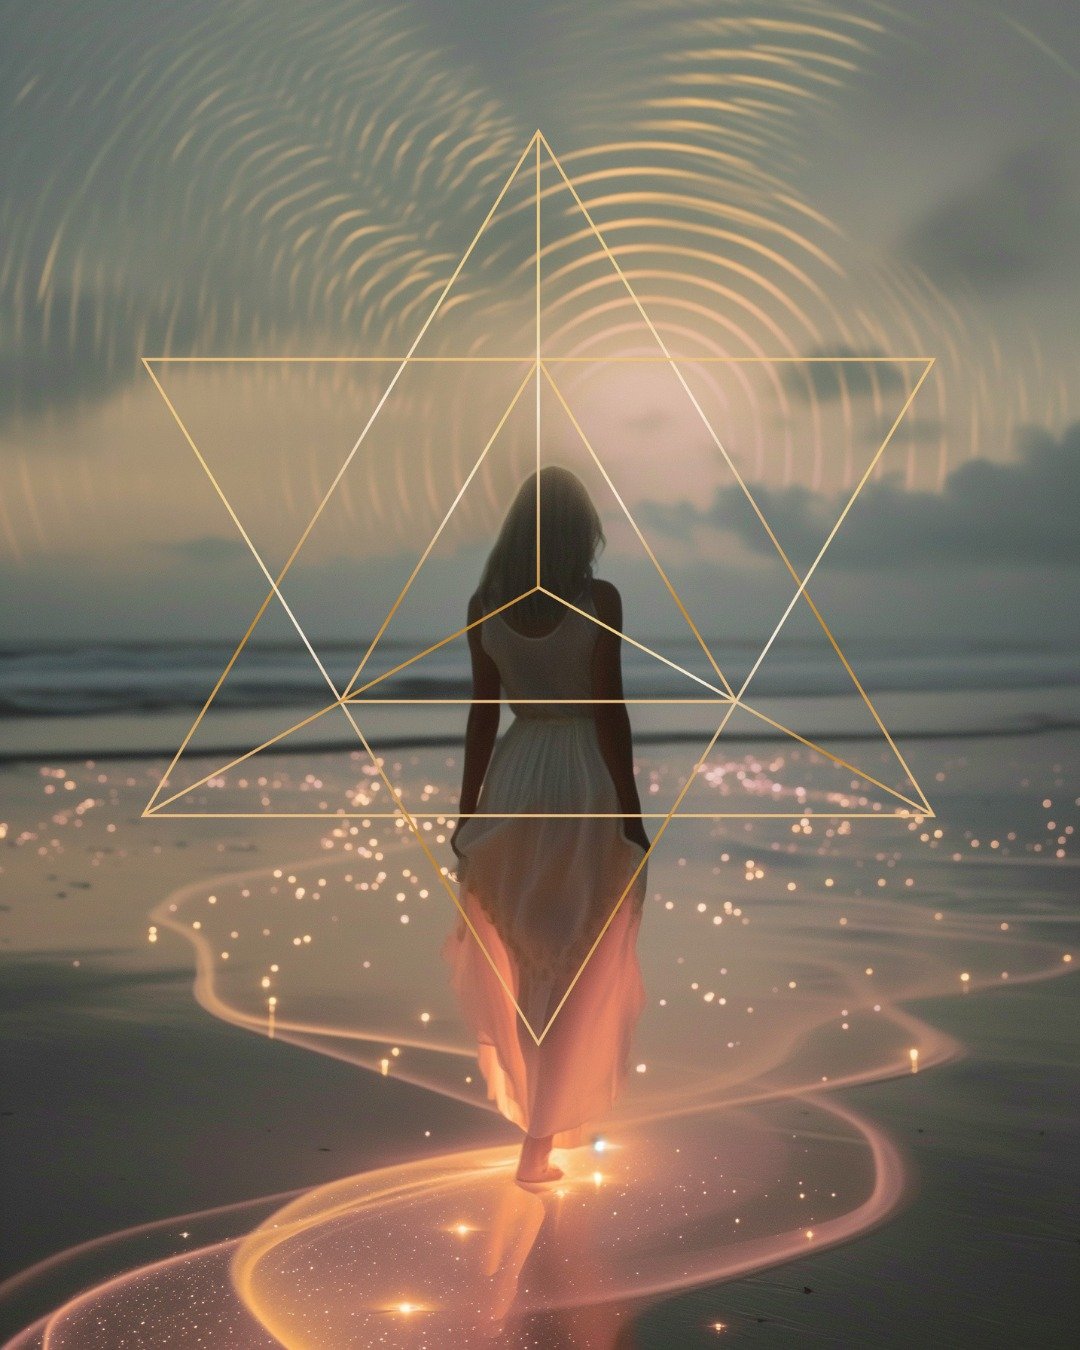 ✨ Let Your Inner Light Guide You ✨

The answers to your biggest questions already lie within. Be still, listen to your heart, and let your inner light guide you. 

The more you trust your intuition, the clearer the way forward will become. 

~~~

Joi